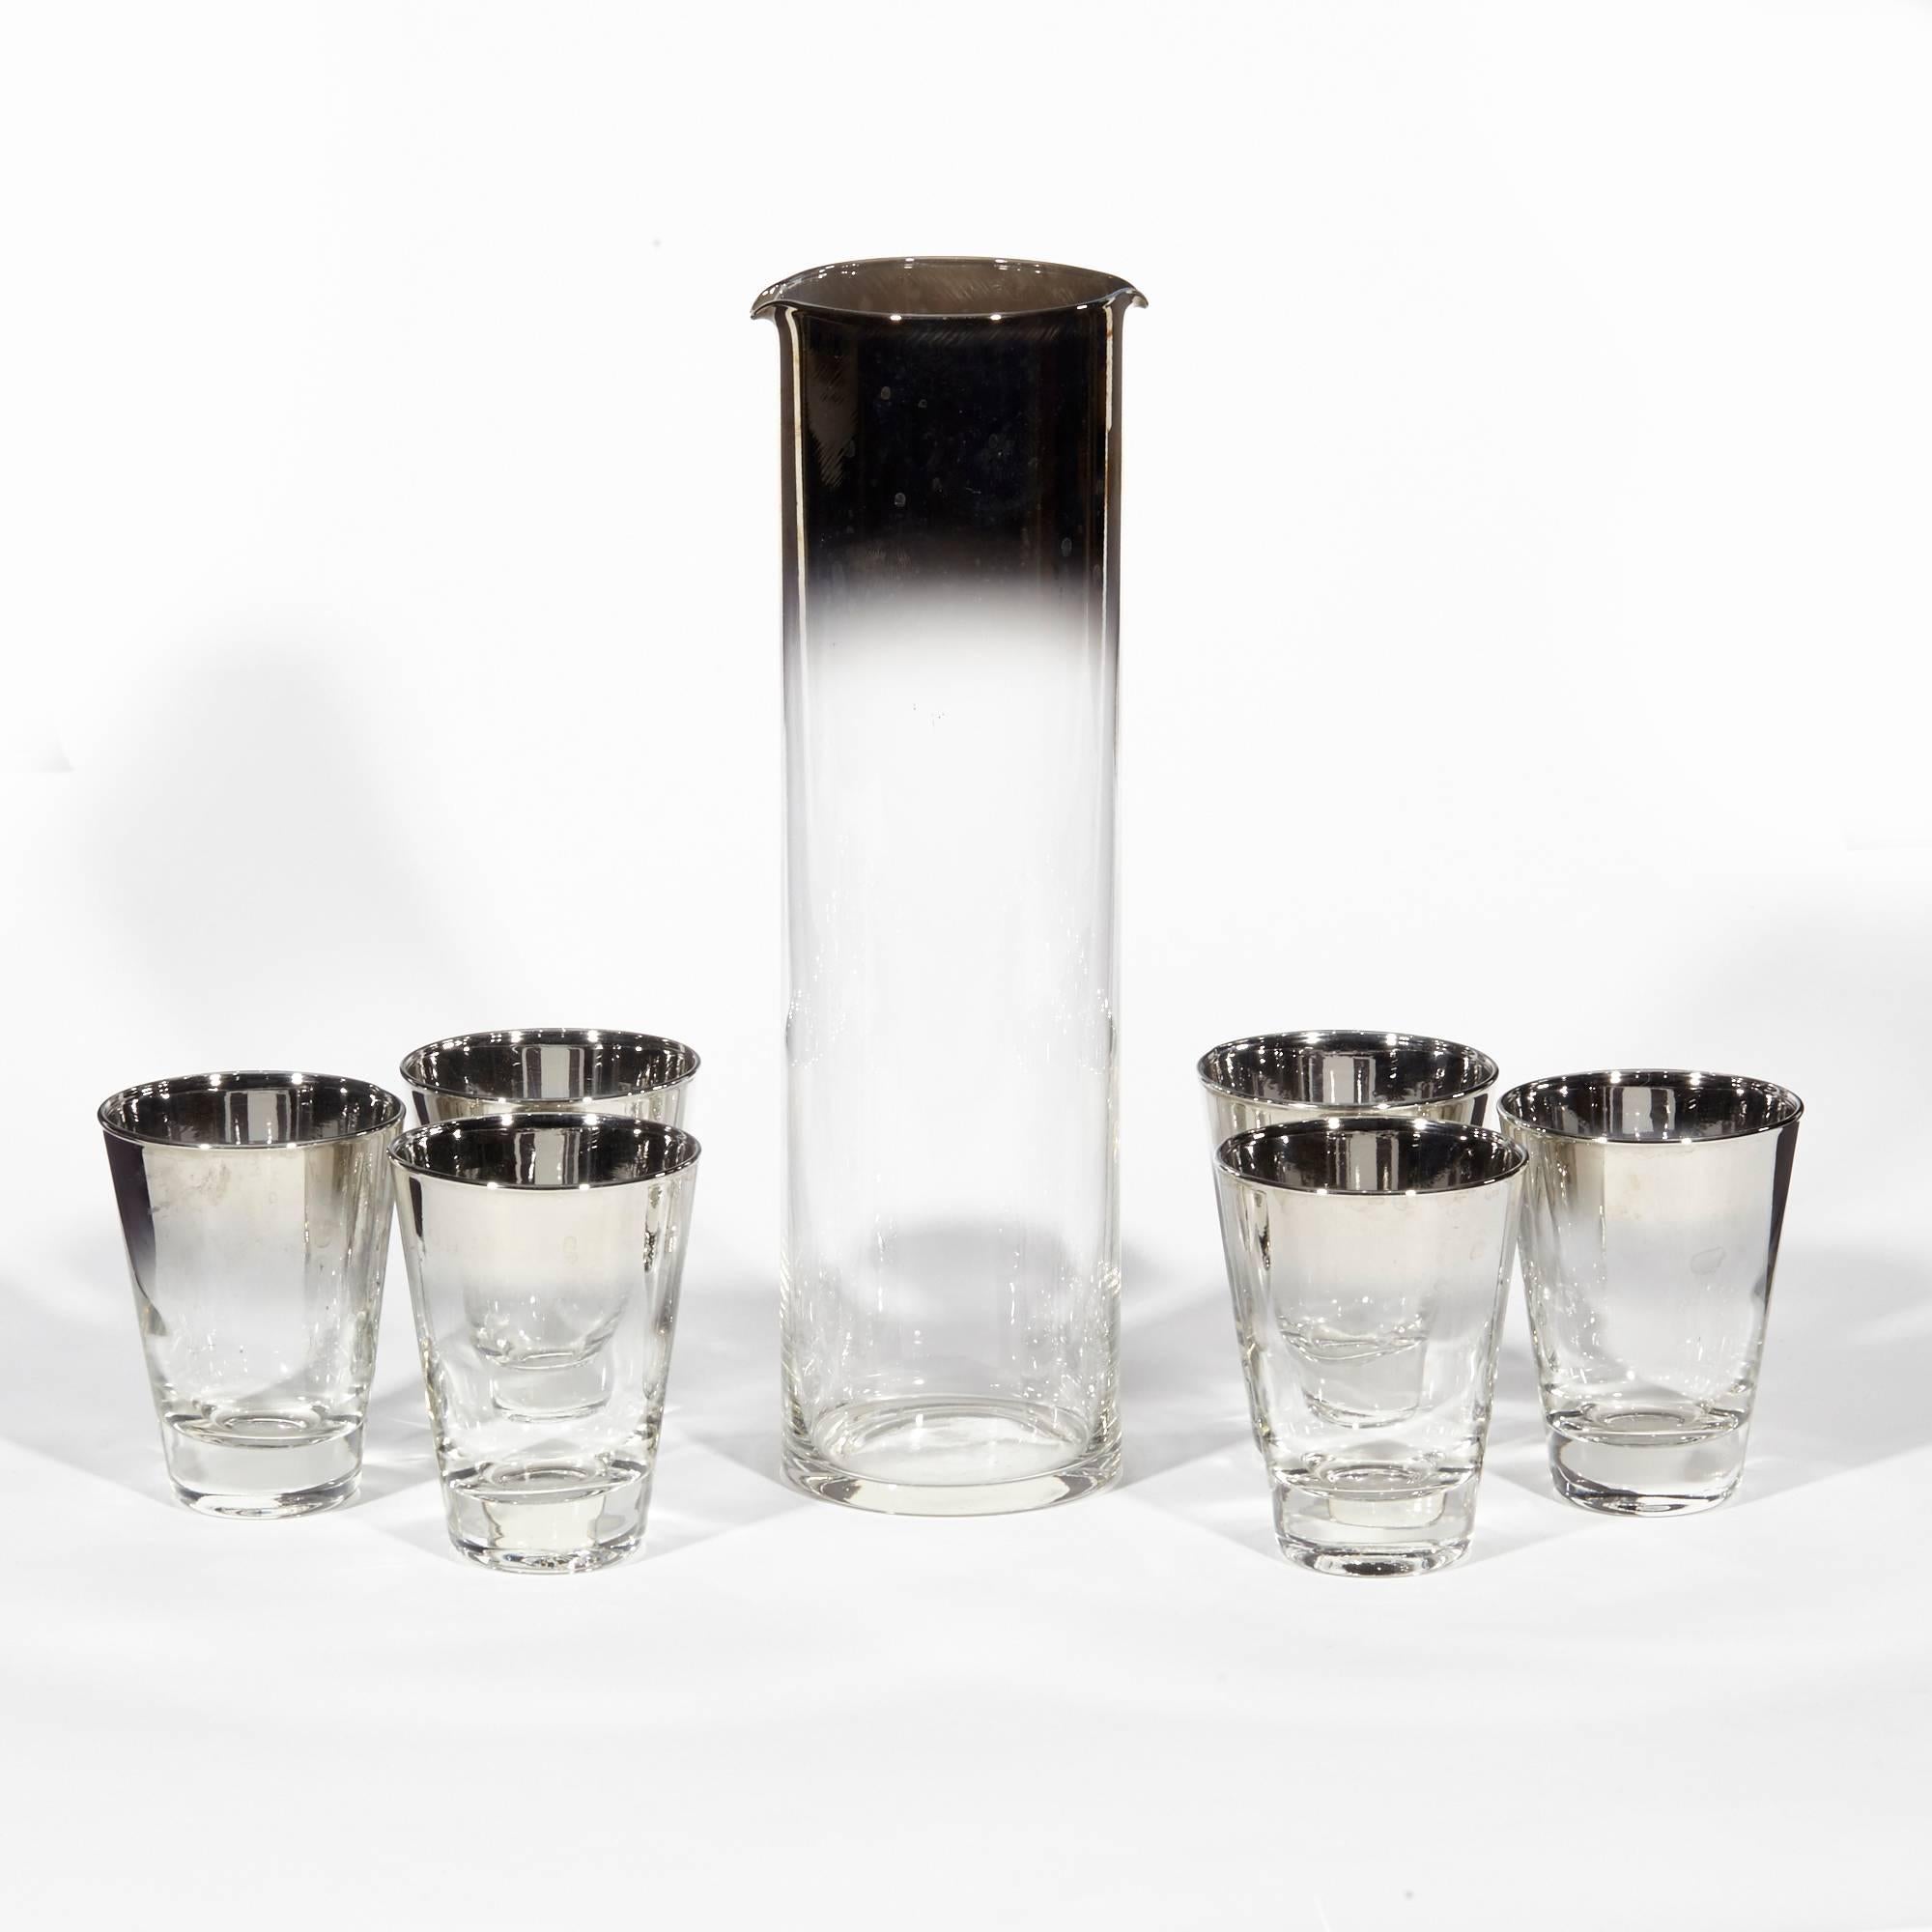 Vintage seven-piece glass cocktail beverage serving set, circa 1960s. The set includes a double spout carafe and 6 liquor tumblers. Tumblers measure 2.5in diameter x 3.5in height.